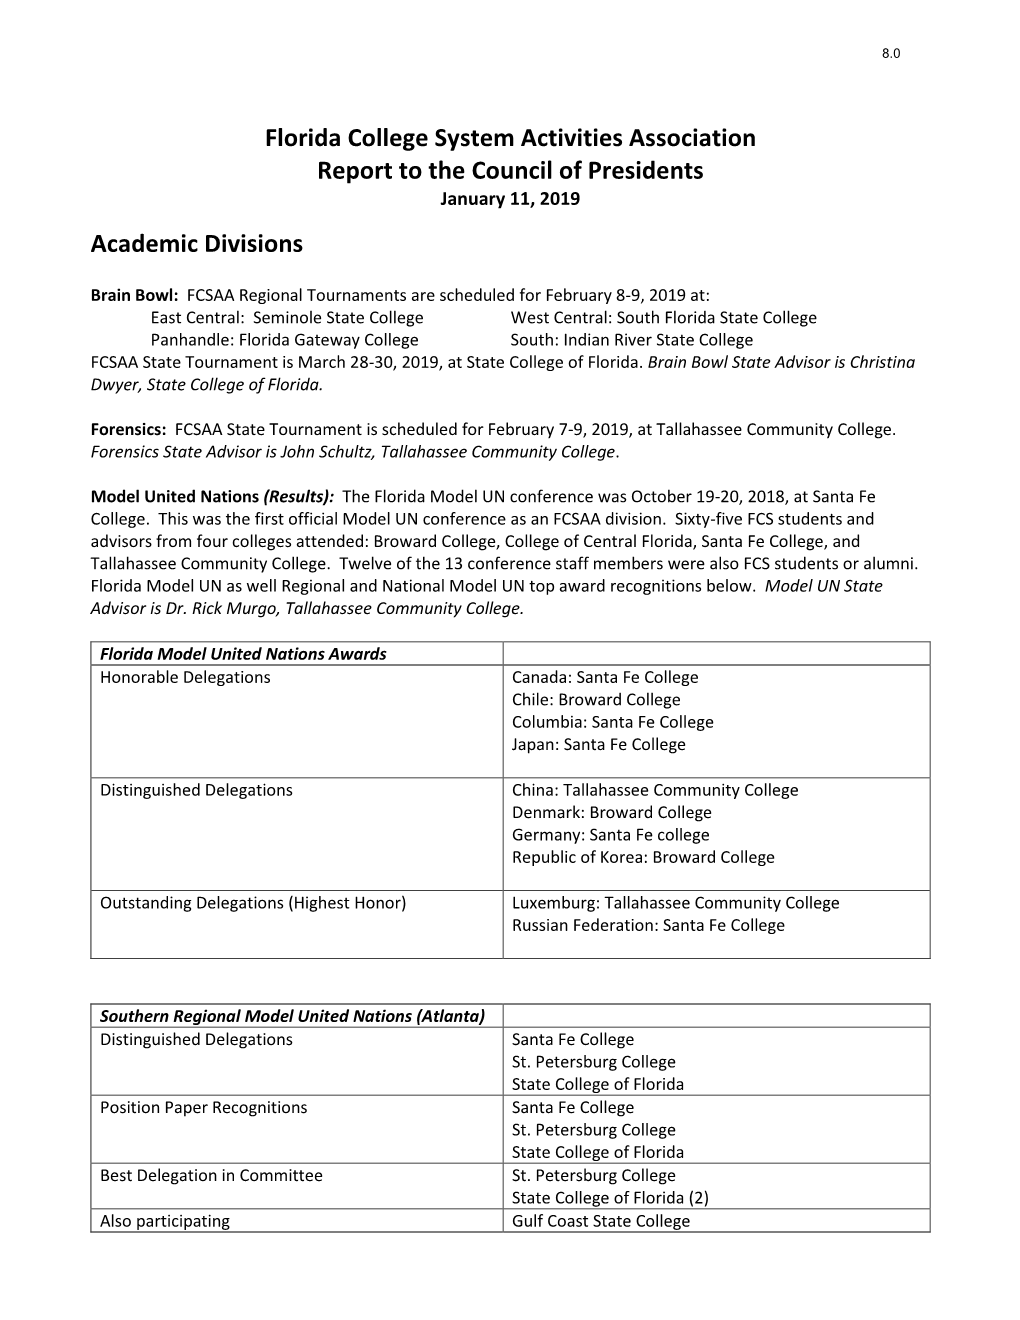 Florida College System Activities Association Report to the Council of Presidents January 11, 2019